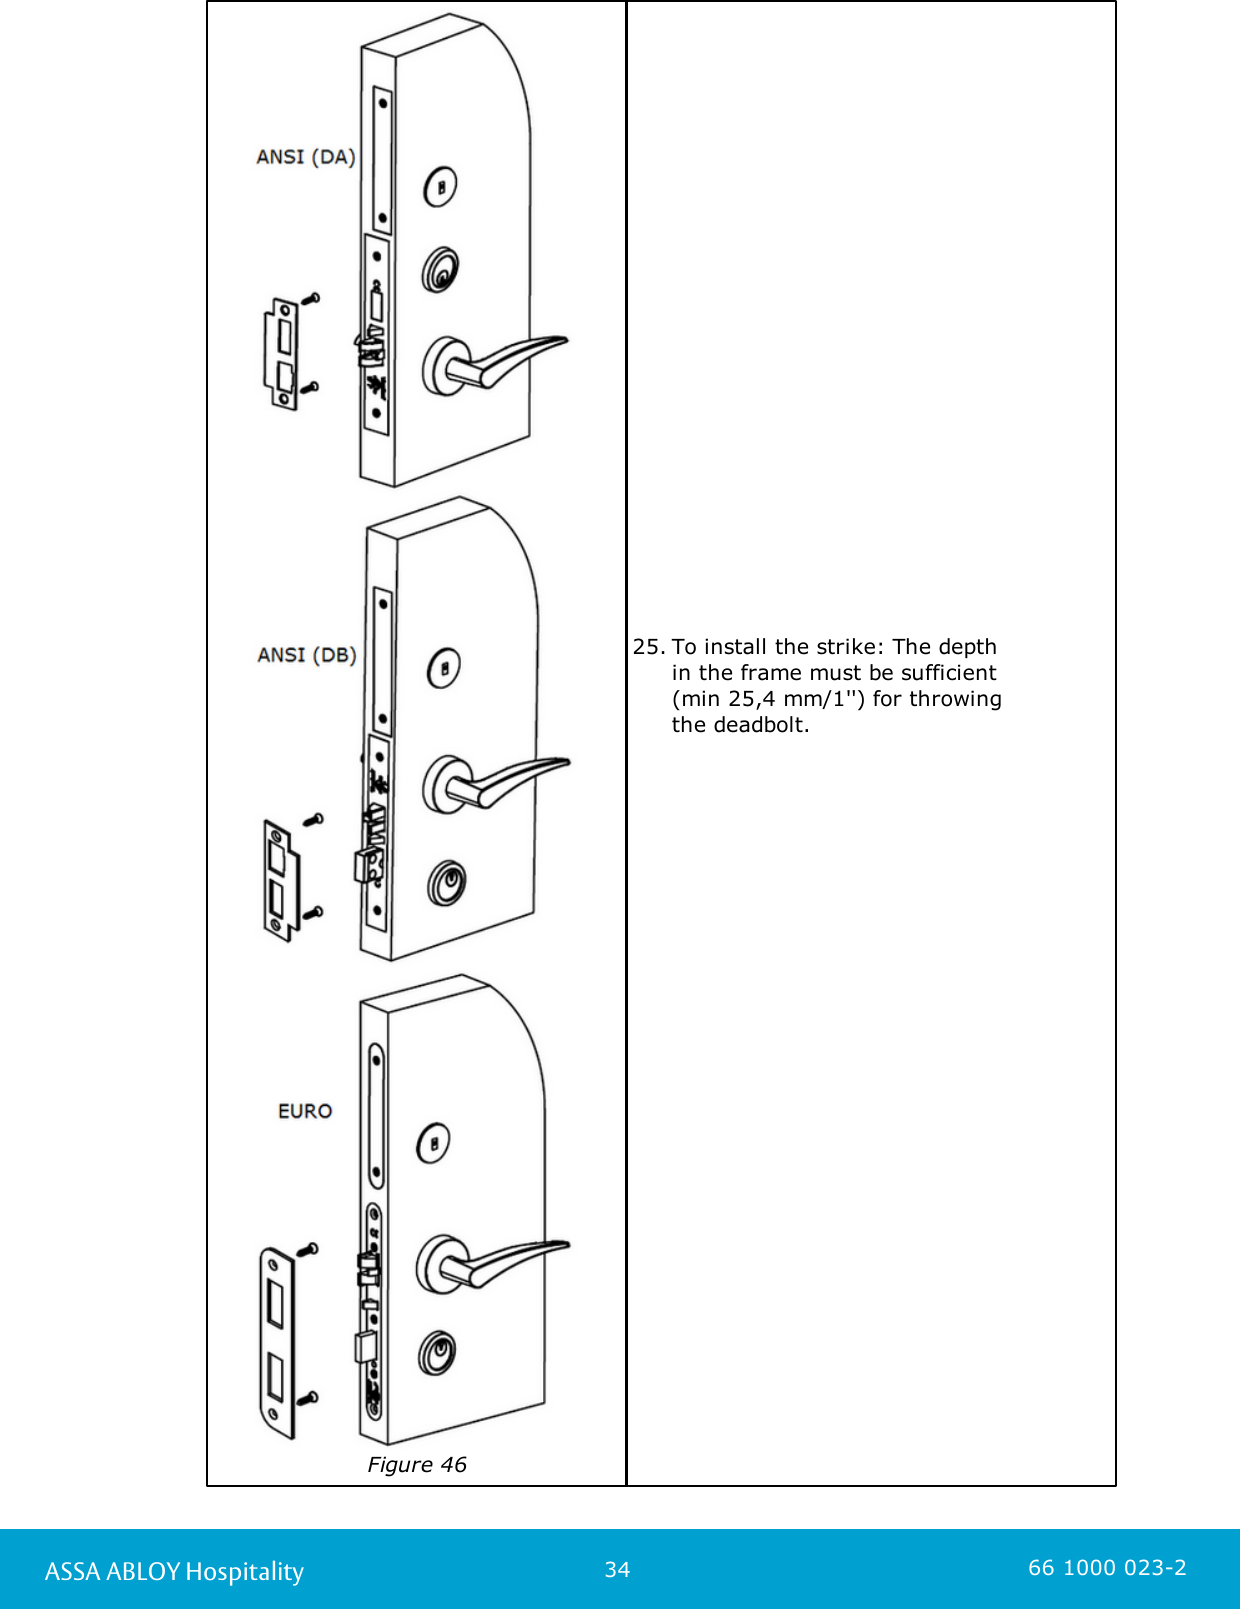 34ASSA ABLOY Hospitality 66 1000 023-2Figure 4625. To install the strike: The depth in the frame must be sufficient (min 25,4 mm/1&apos;&apos;) for throwing the deadbolt. 